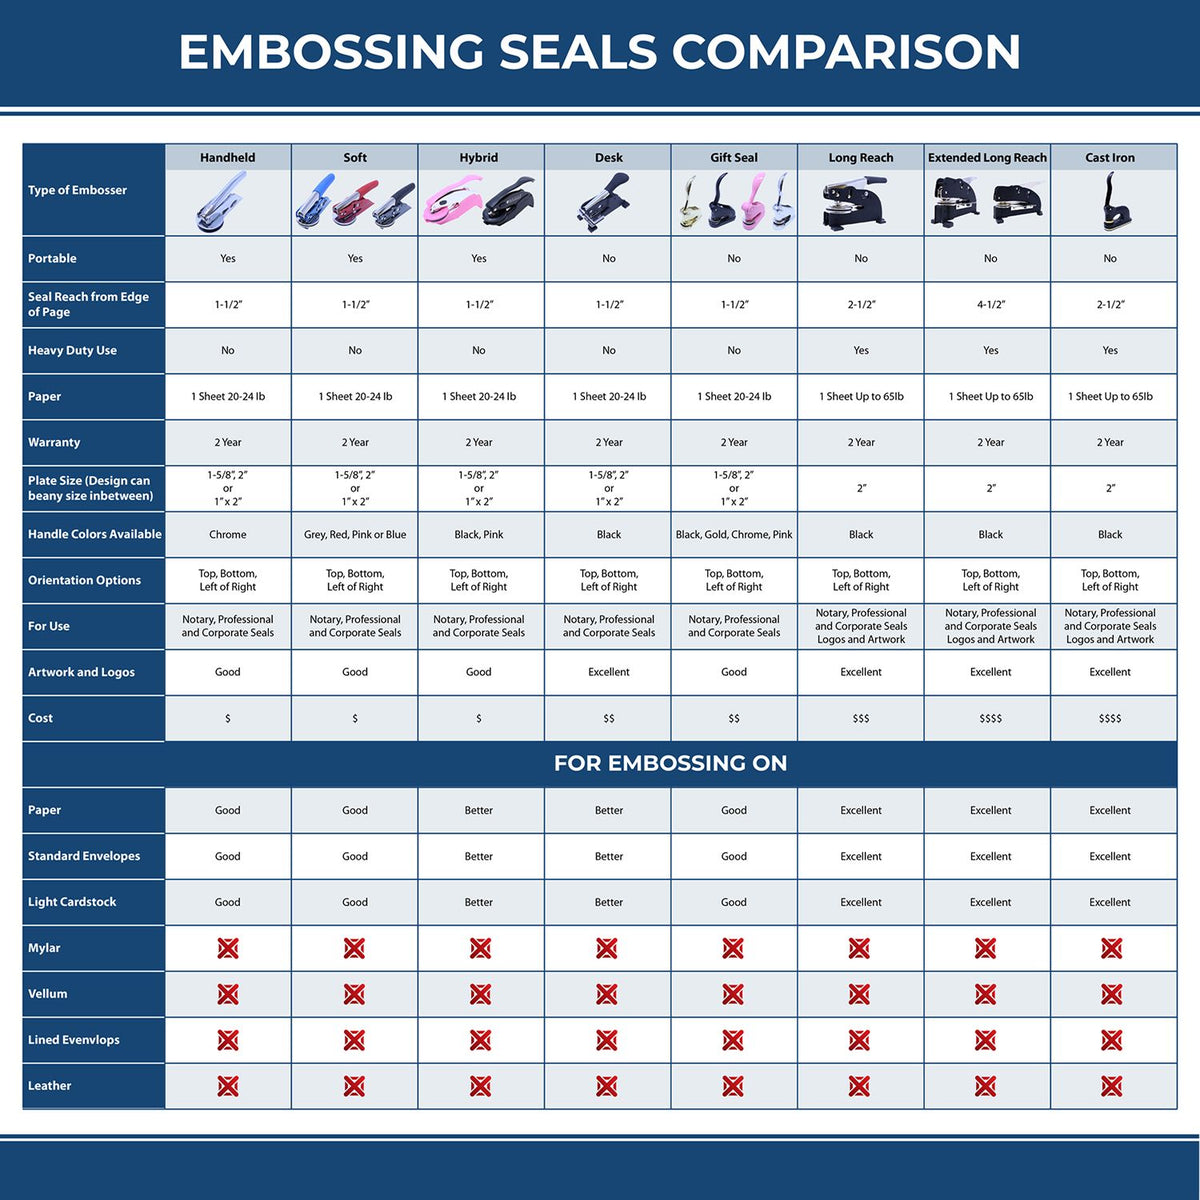 A comparison chart for the different types of mount models available for the Soft Alabama Professional Engineer Seal.